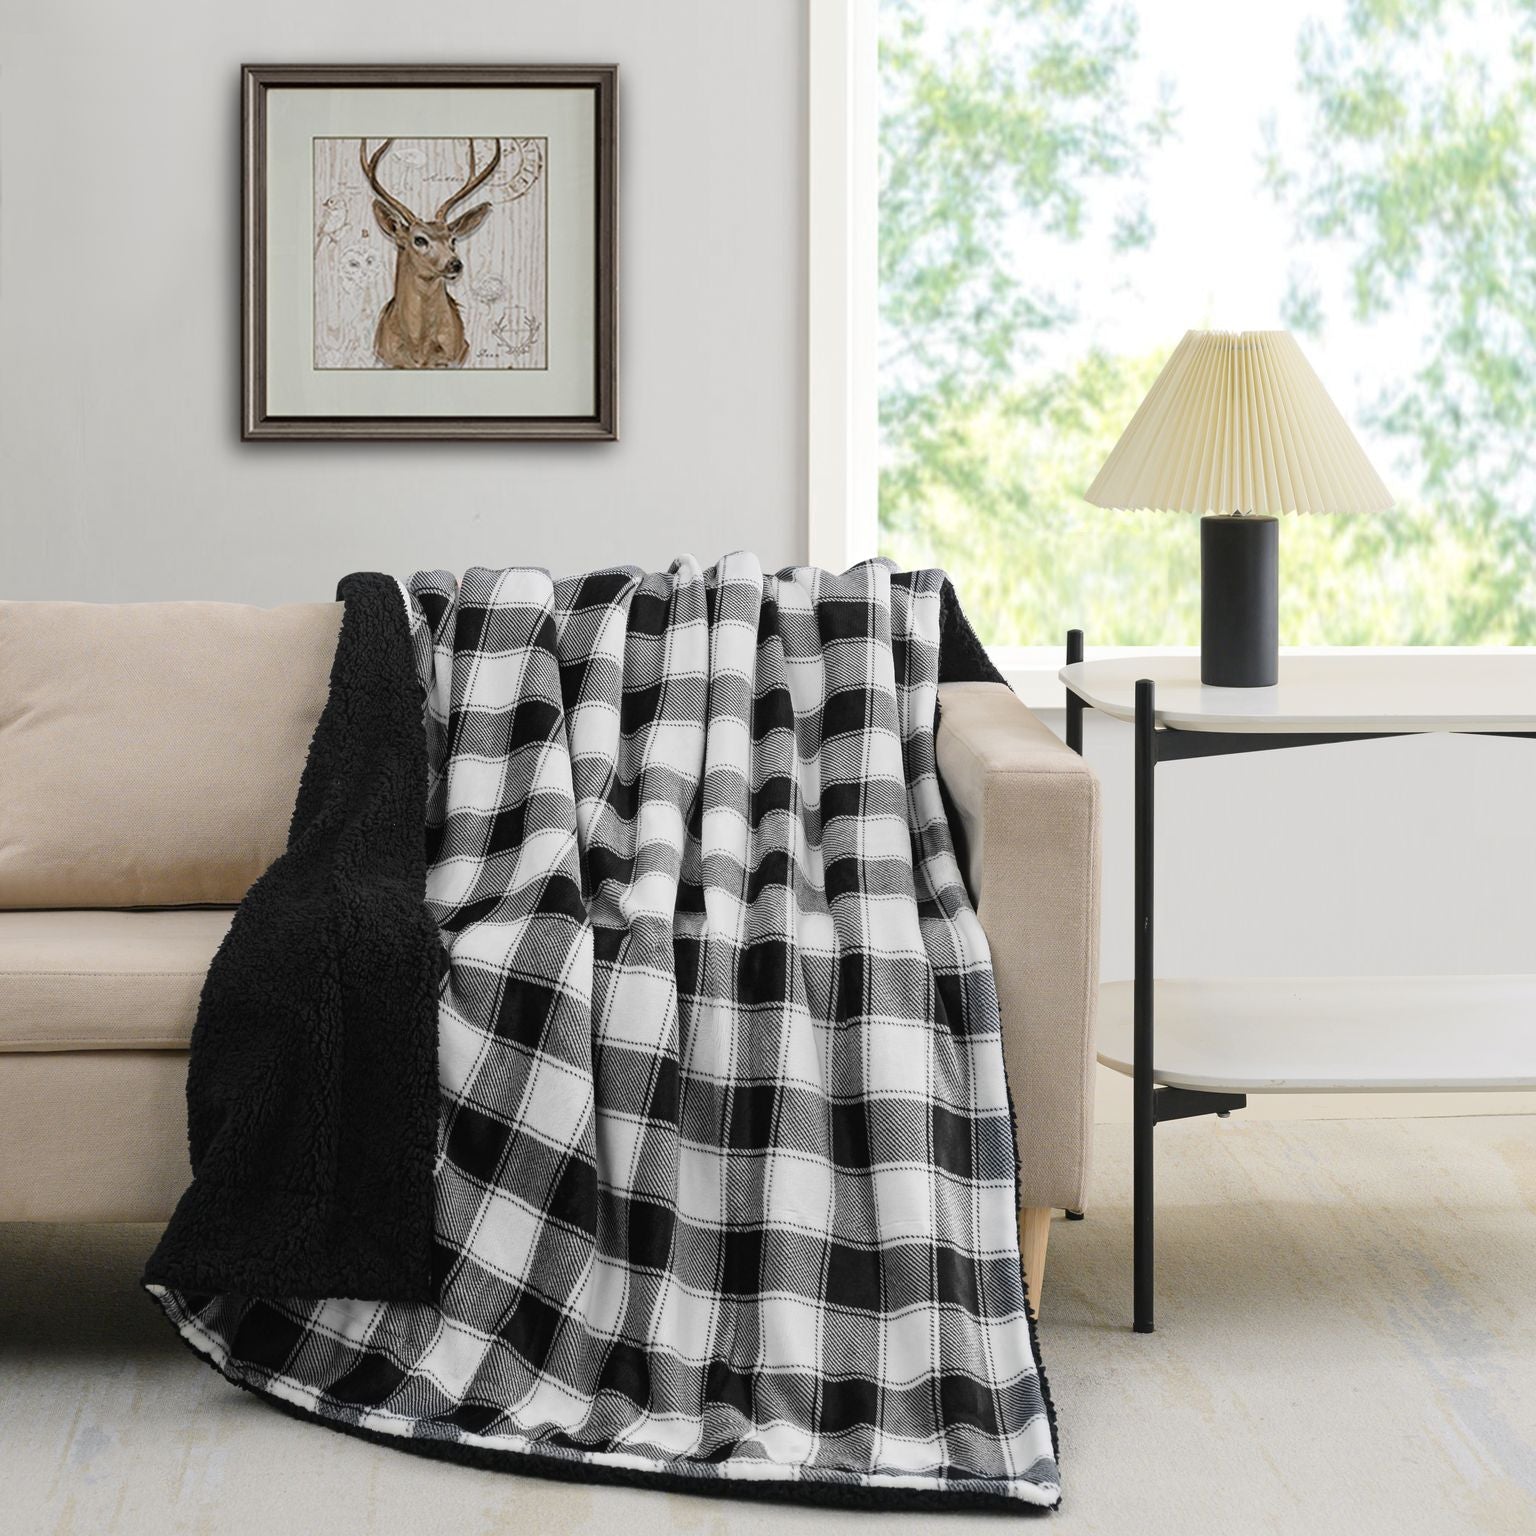 Printed Velvet to Solid Sherpa Throw Blanket 50 x 60 inches Lux Buffalo Check